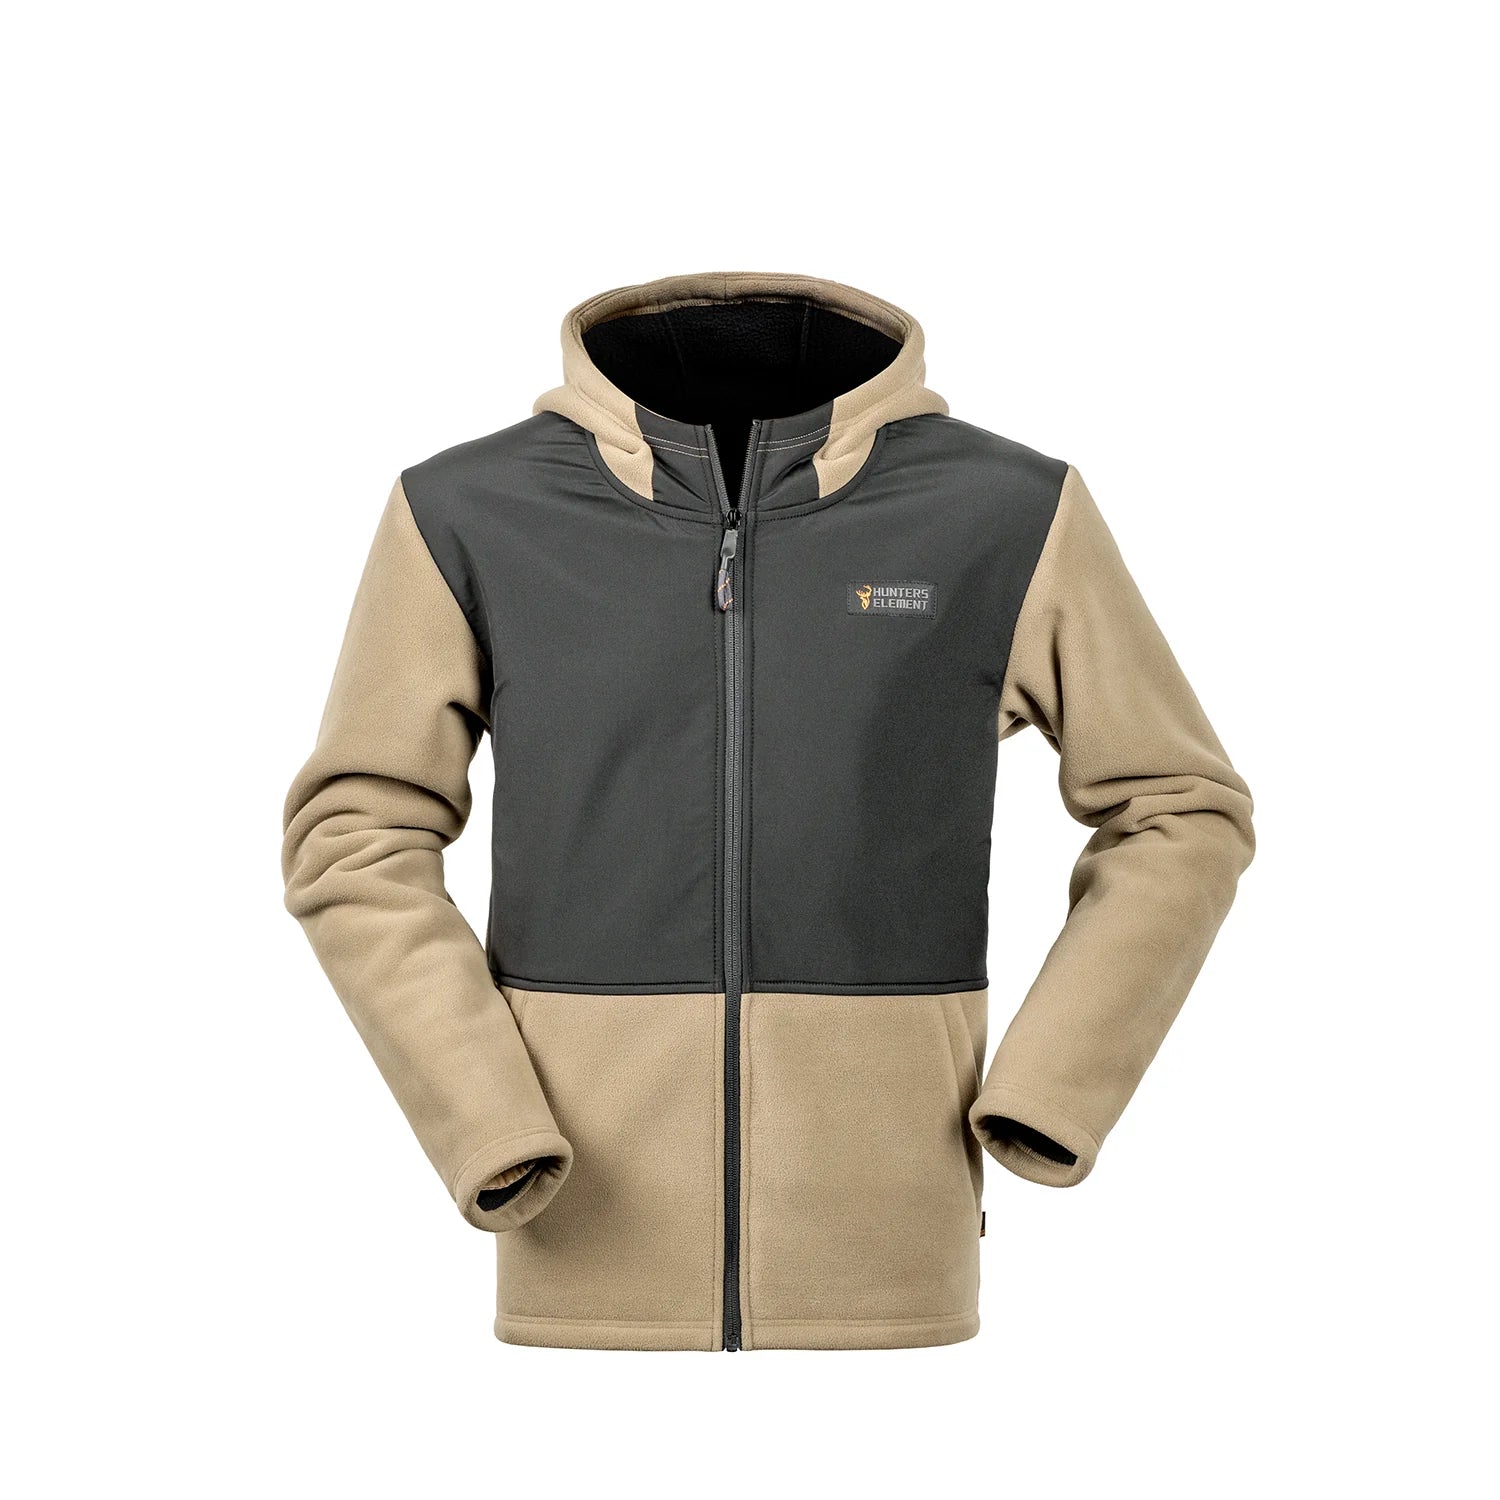 Hunters Element Furnace Hoodie - S / TUSSOCK - Mansfield Hunting & Fishing - Products to prepare for Corona Virus